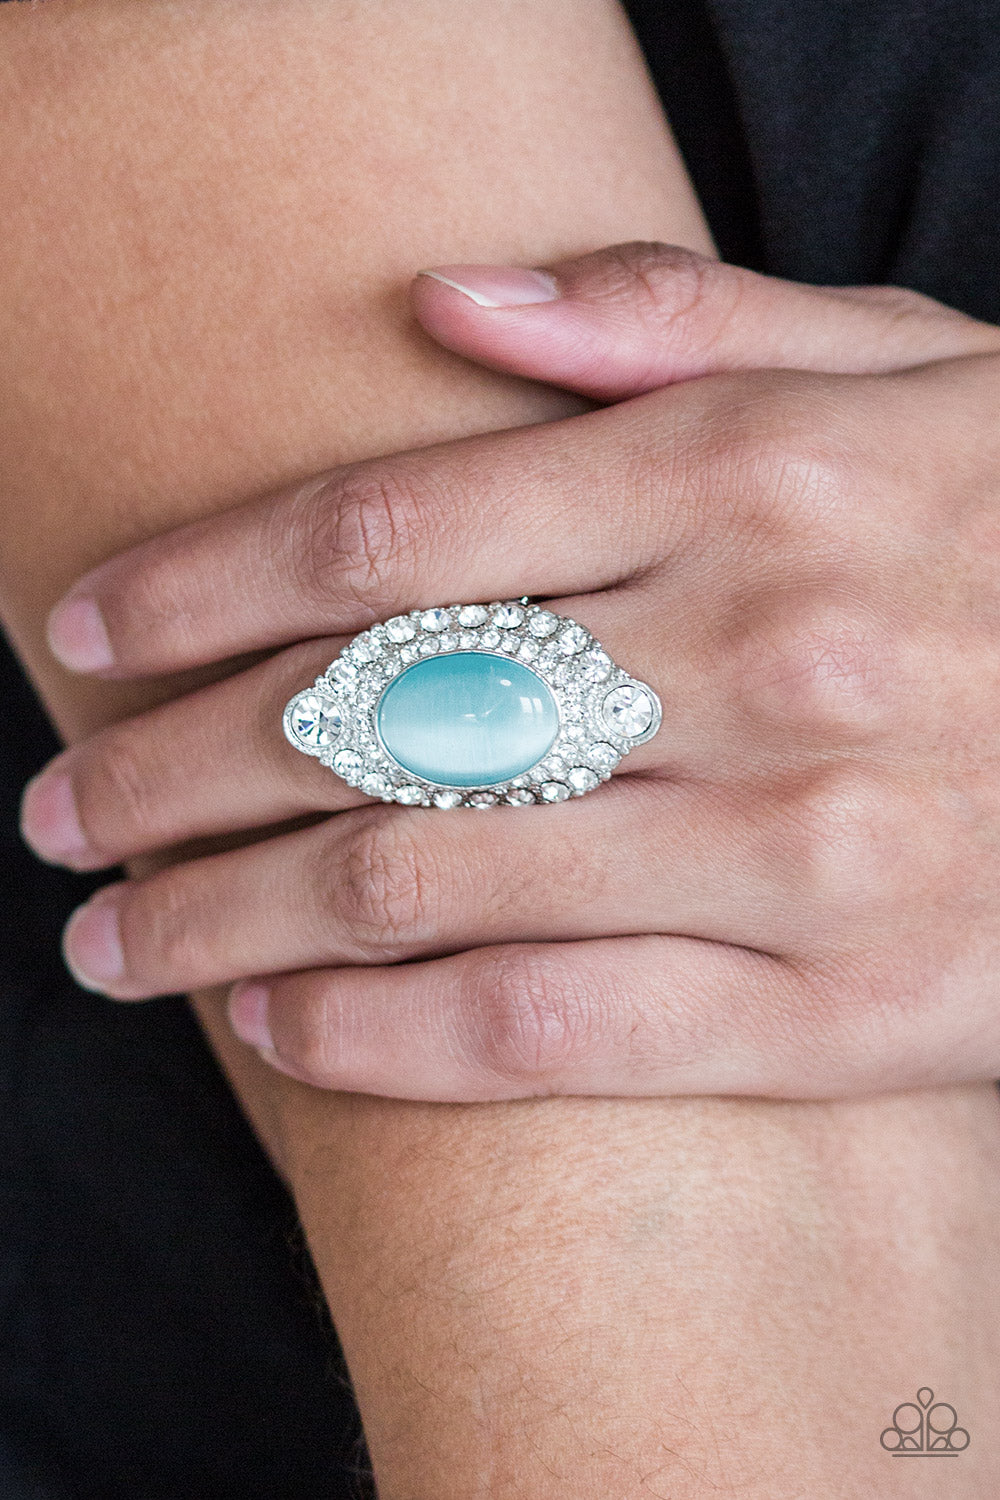 Riviera Royalty - Blue A glowing blue moonstone is pressed into a dramatic silver band radiating with glassy white rhinestones for a glamorous flair. Features a stretchy band for a flexible fit.  Sold as one individual ring.